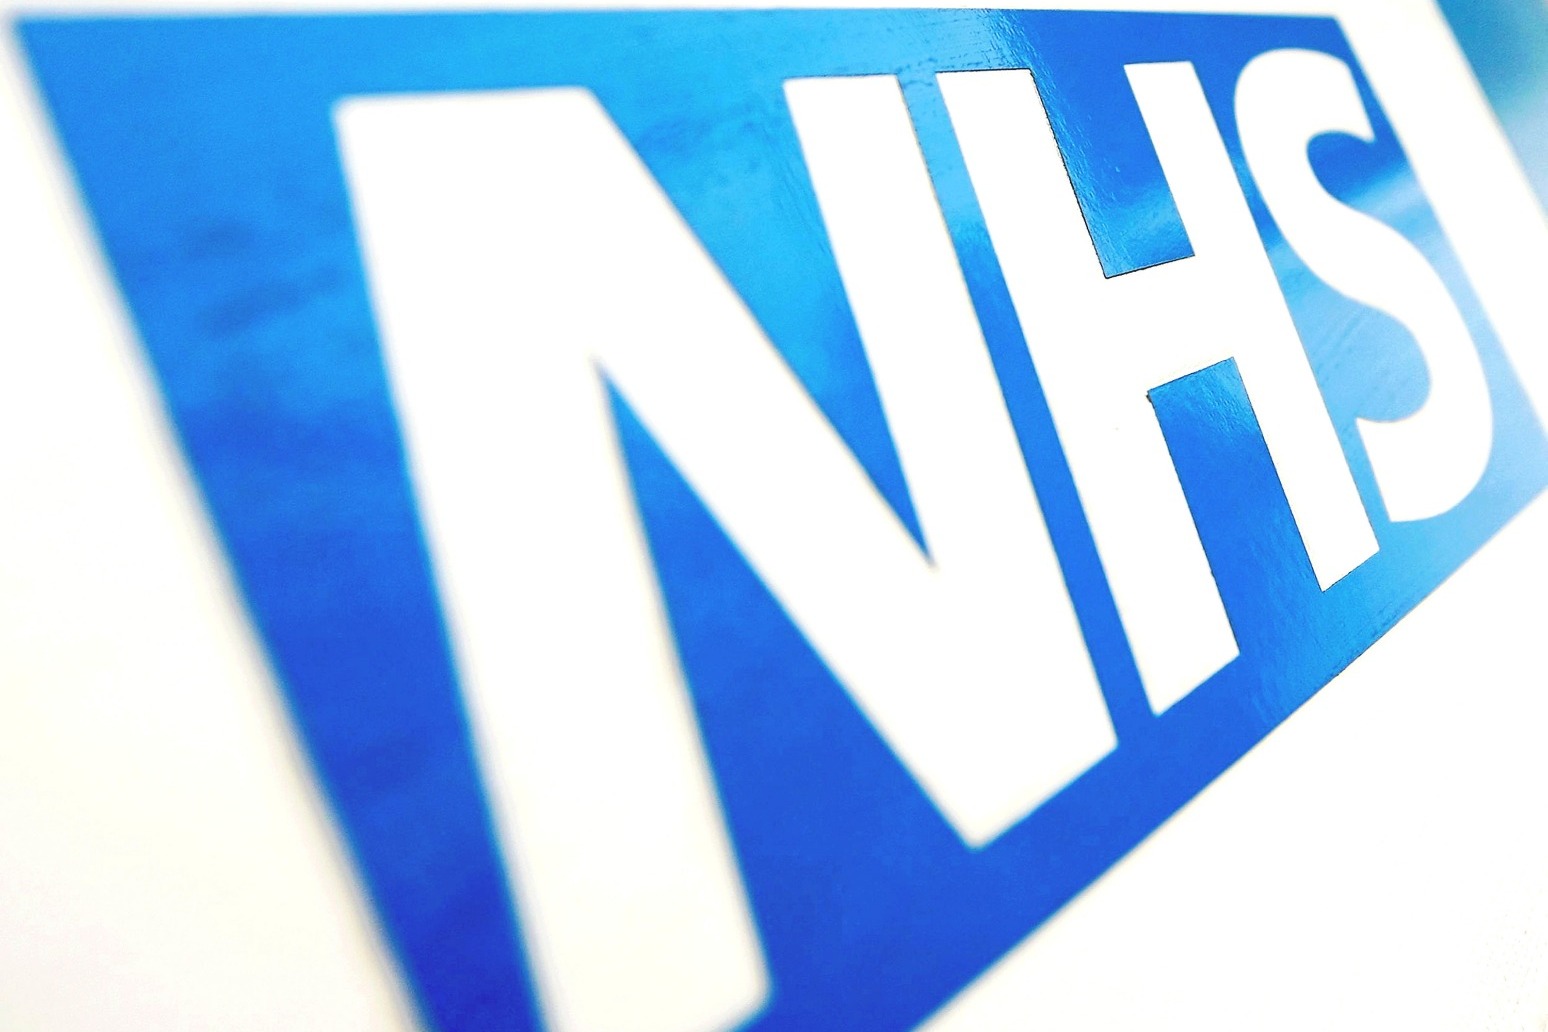 Only 13% think Government has right policies for NHS, poll suggests 